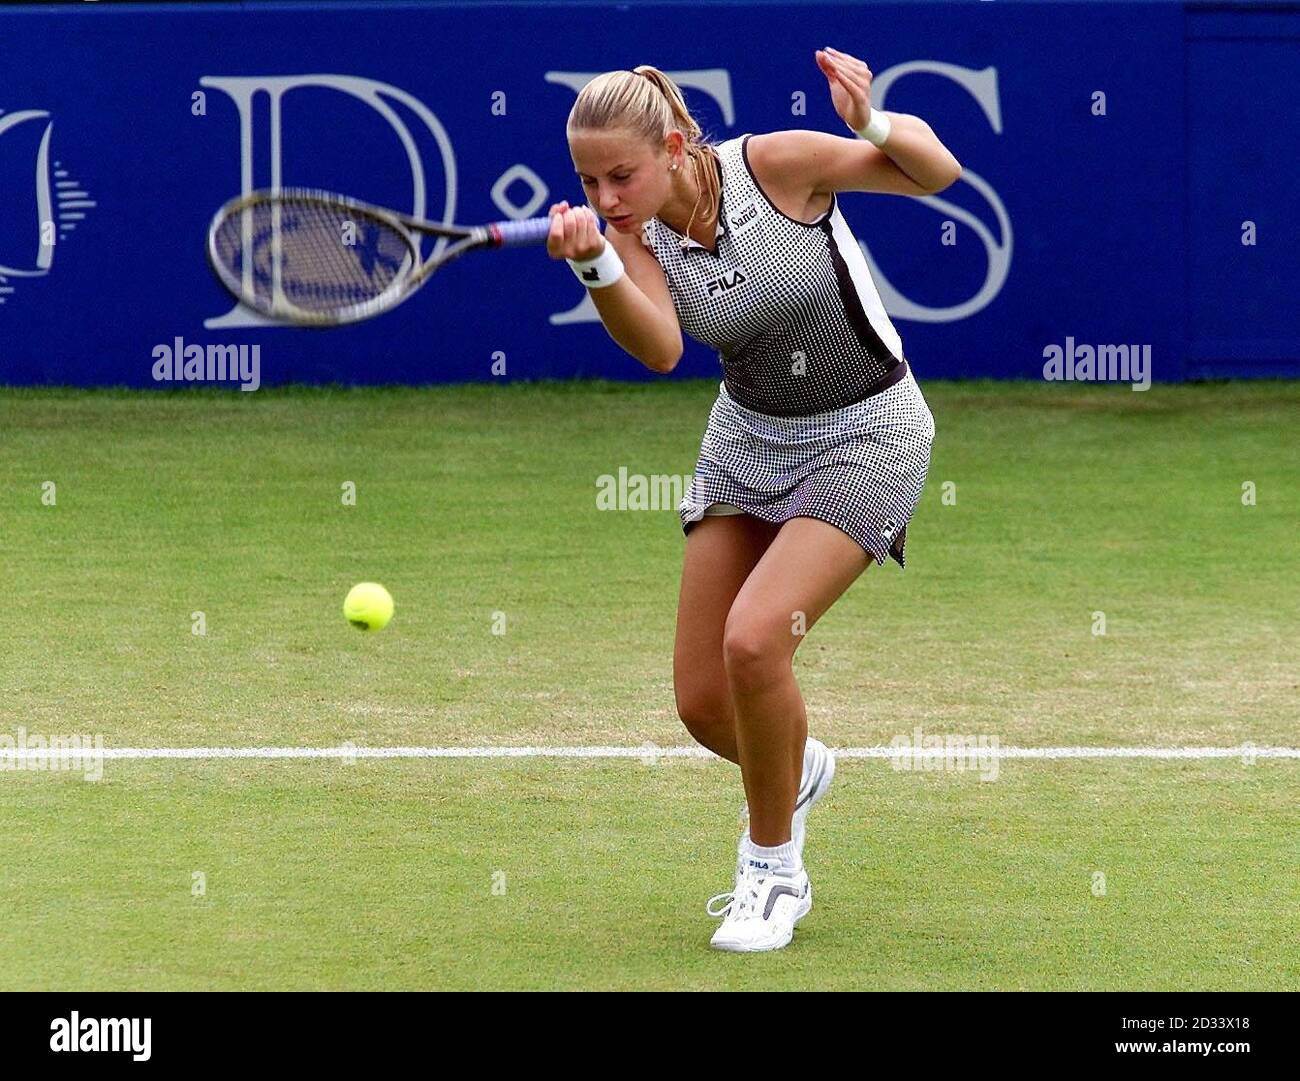 Jelena Dokic of Yugoslavia in action during her straight sets victory over Anastasia Myskina of Russia in the final of the DFS Classic at the Priory Club, Edgbaston, Birmingham. Stock Photo